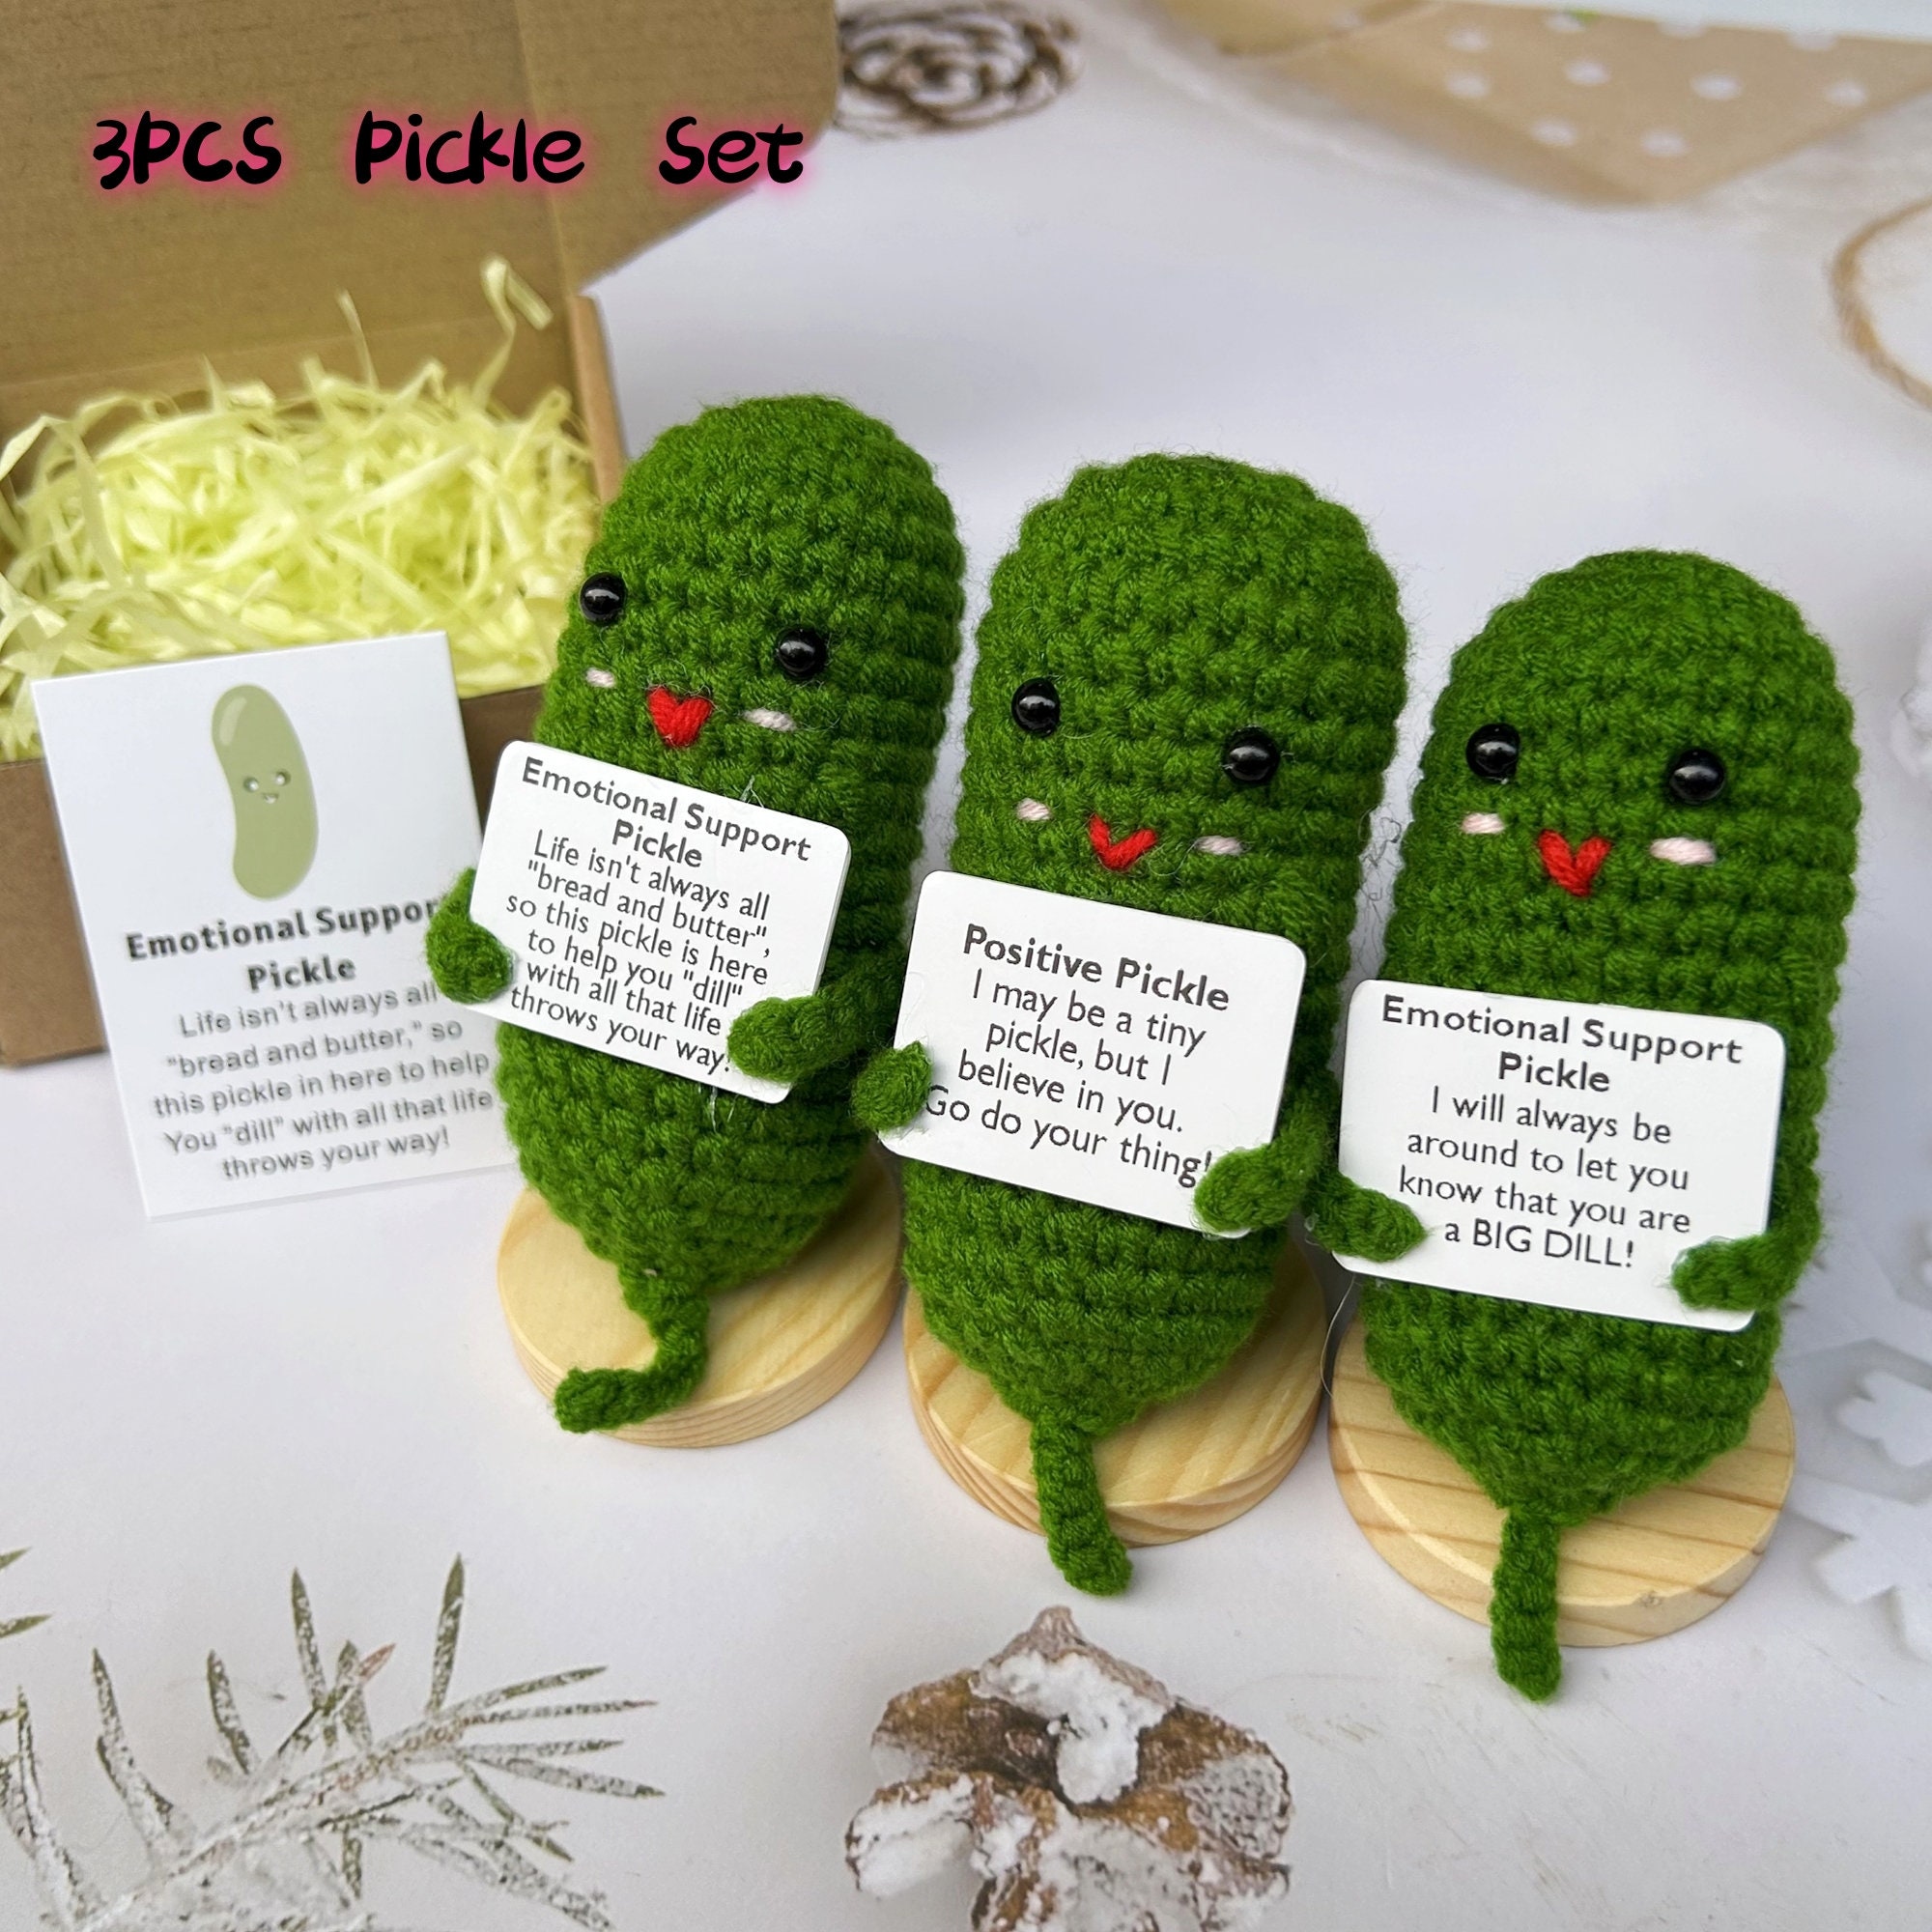 PICKLE PALS Emotional Support Pickle Plush Amigurumi W/ Laminated Card 